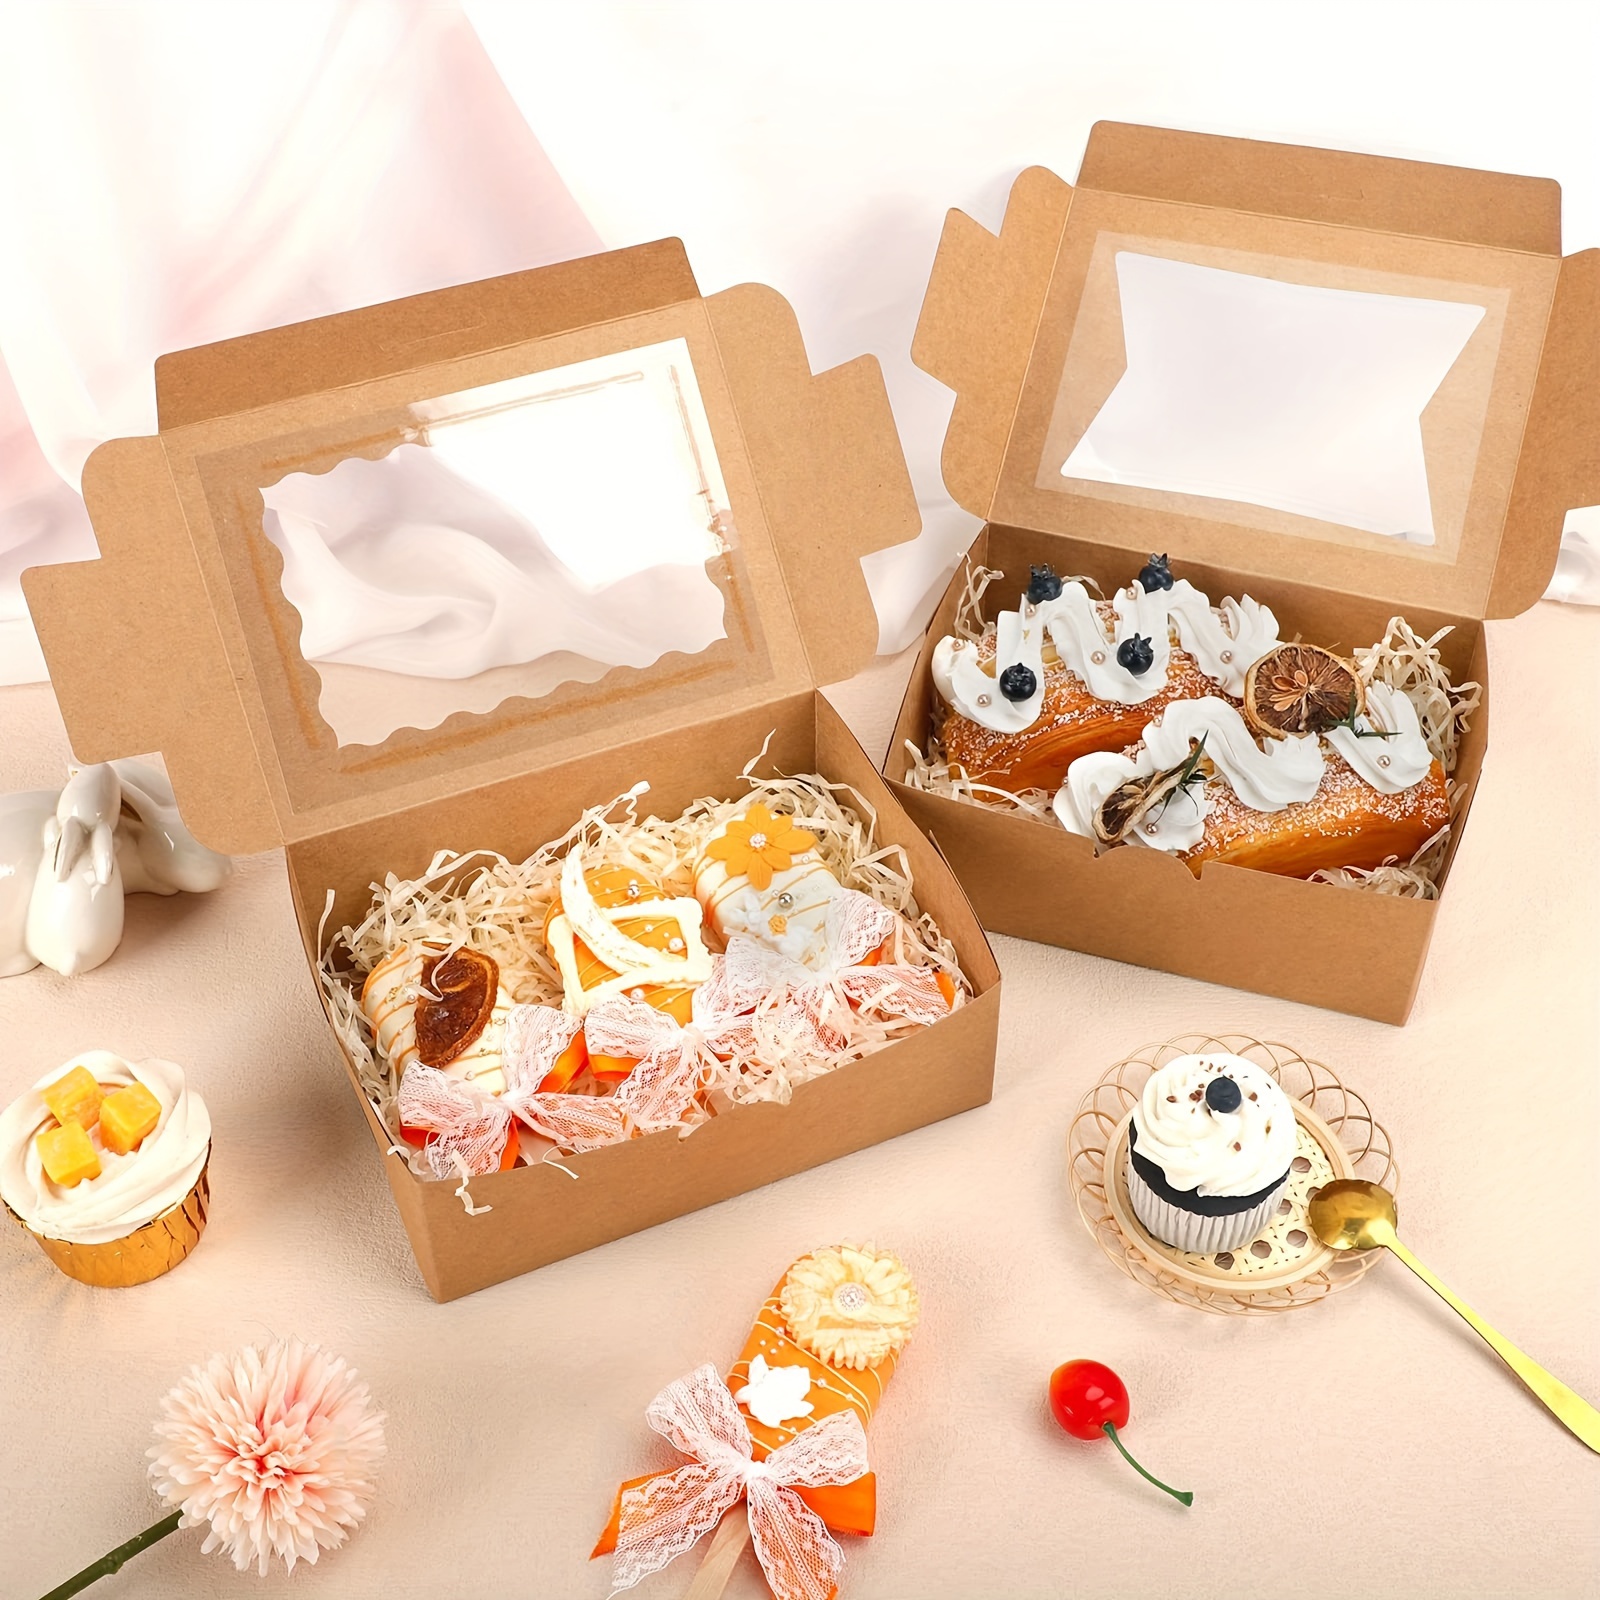 Zealax 9 inch Bakery Boxes with Window and Dividers Cookie Packaging Treat Boxes for Mini Cupcakes, Chocolate Covered Strawberries, Brownies, and